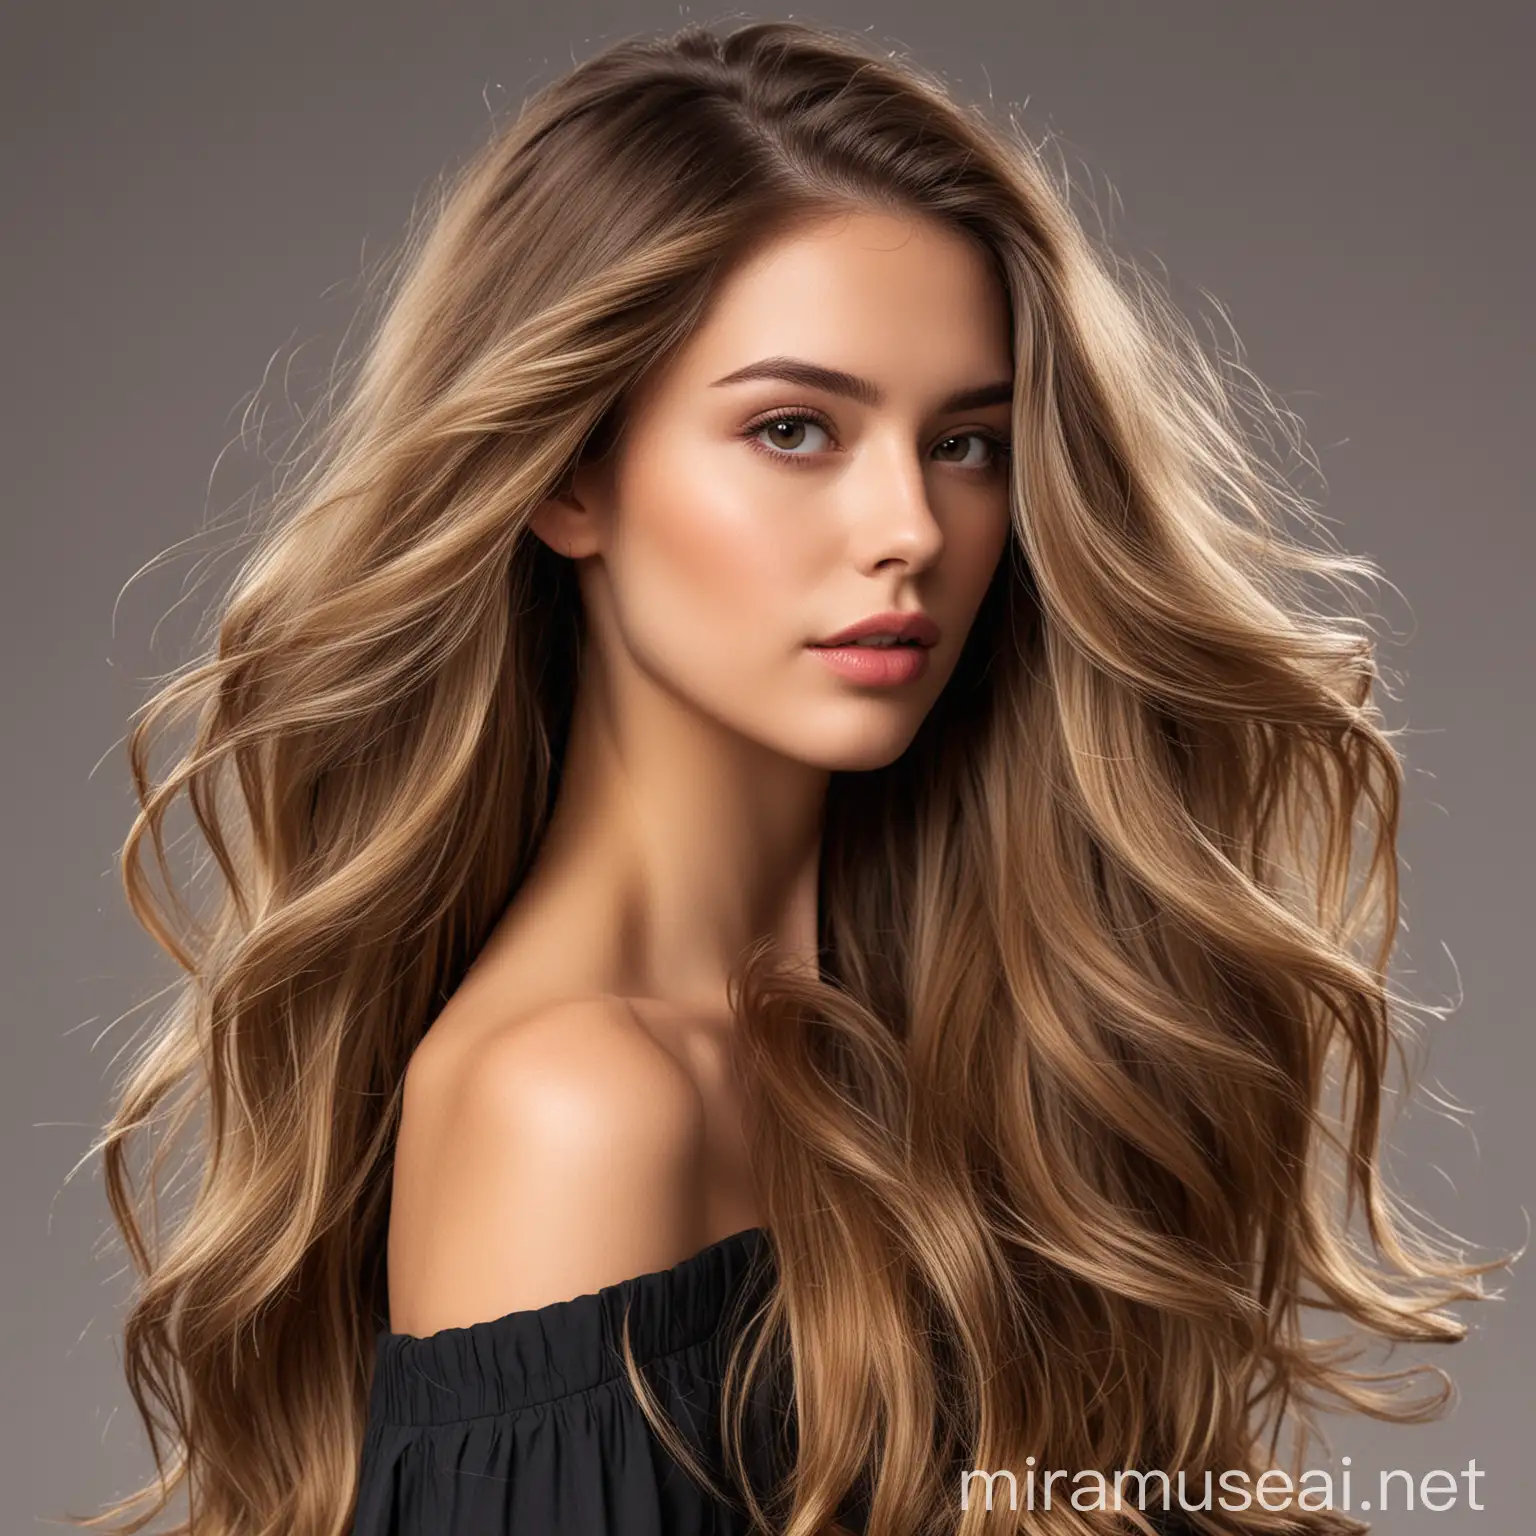 Spectacular Long Balayage Hair on Profile Model Stunning Hair Color and Style